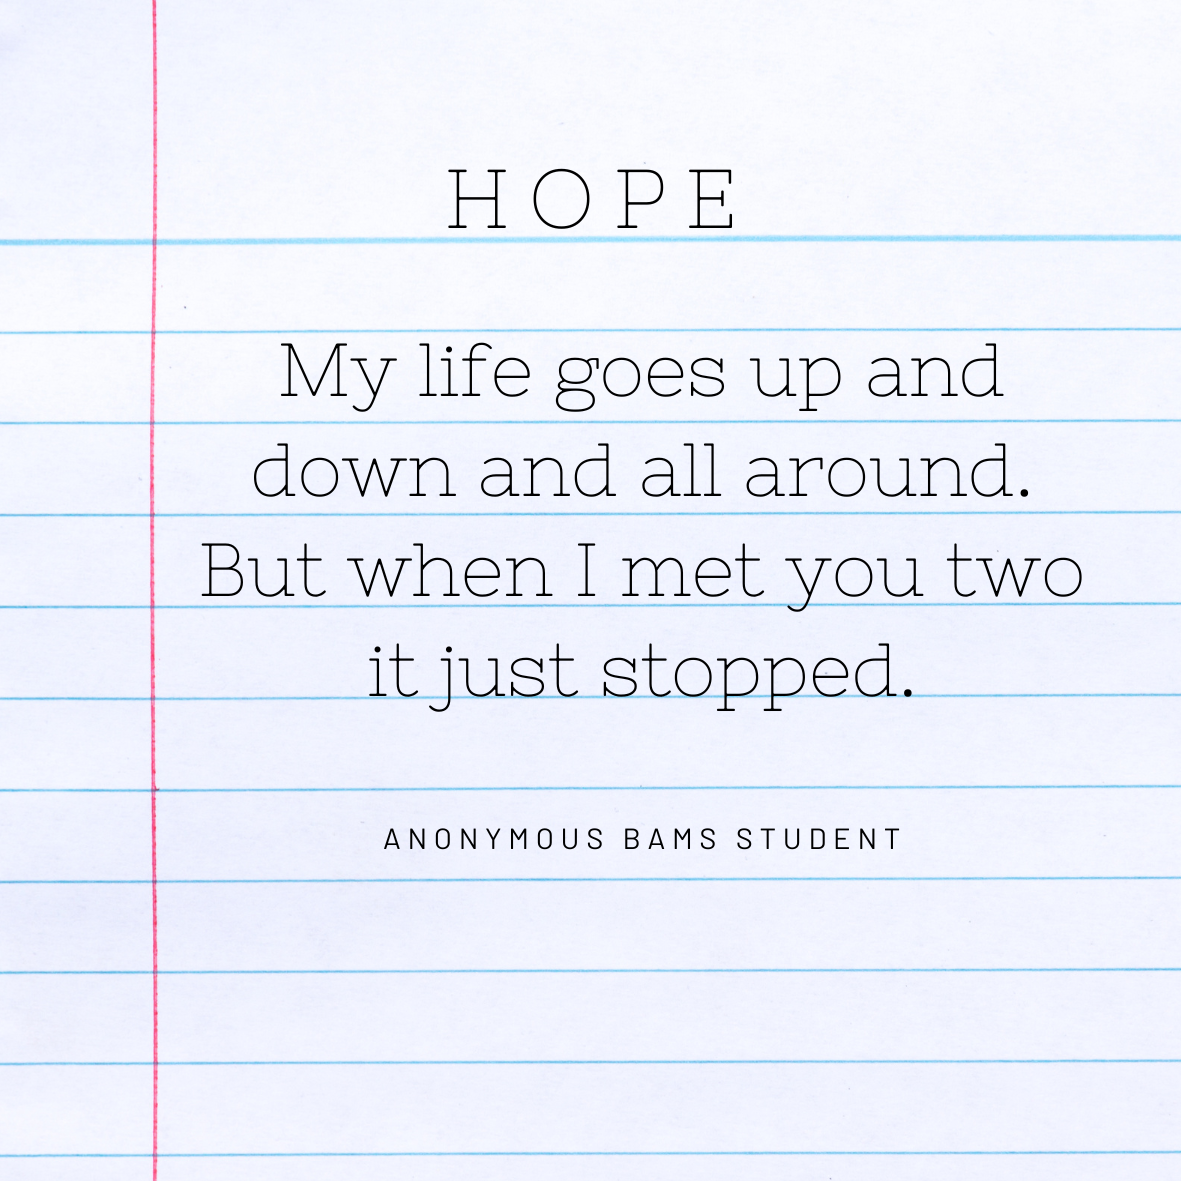 Hope: My life goes up and down and all around. But when I met you two it just stopped.